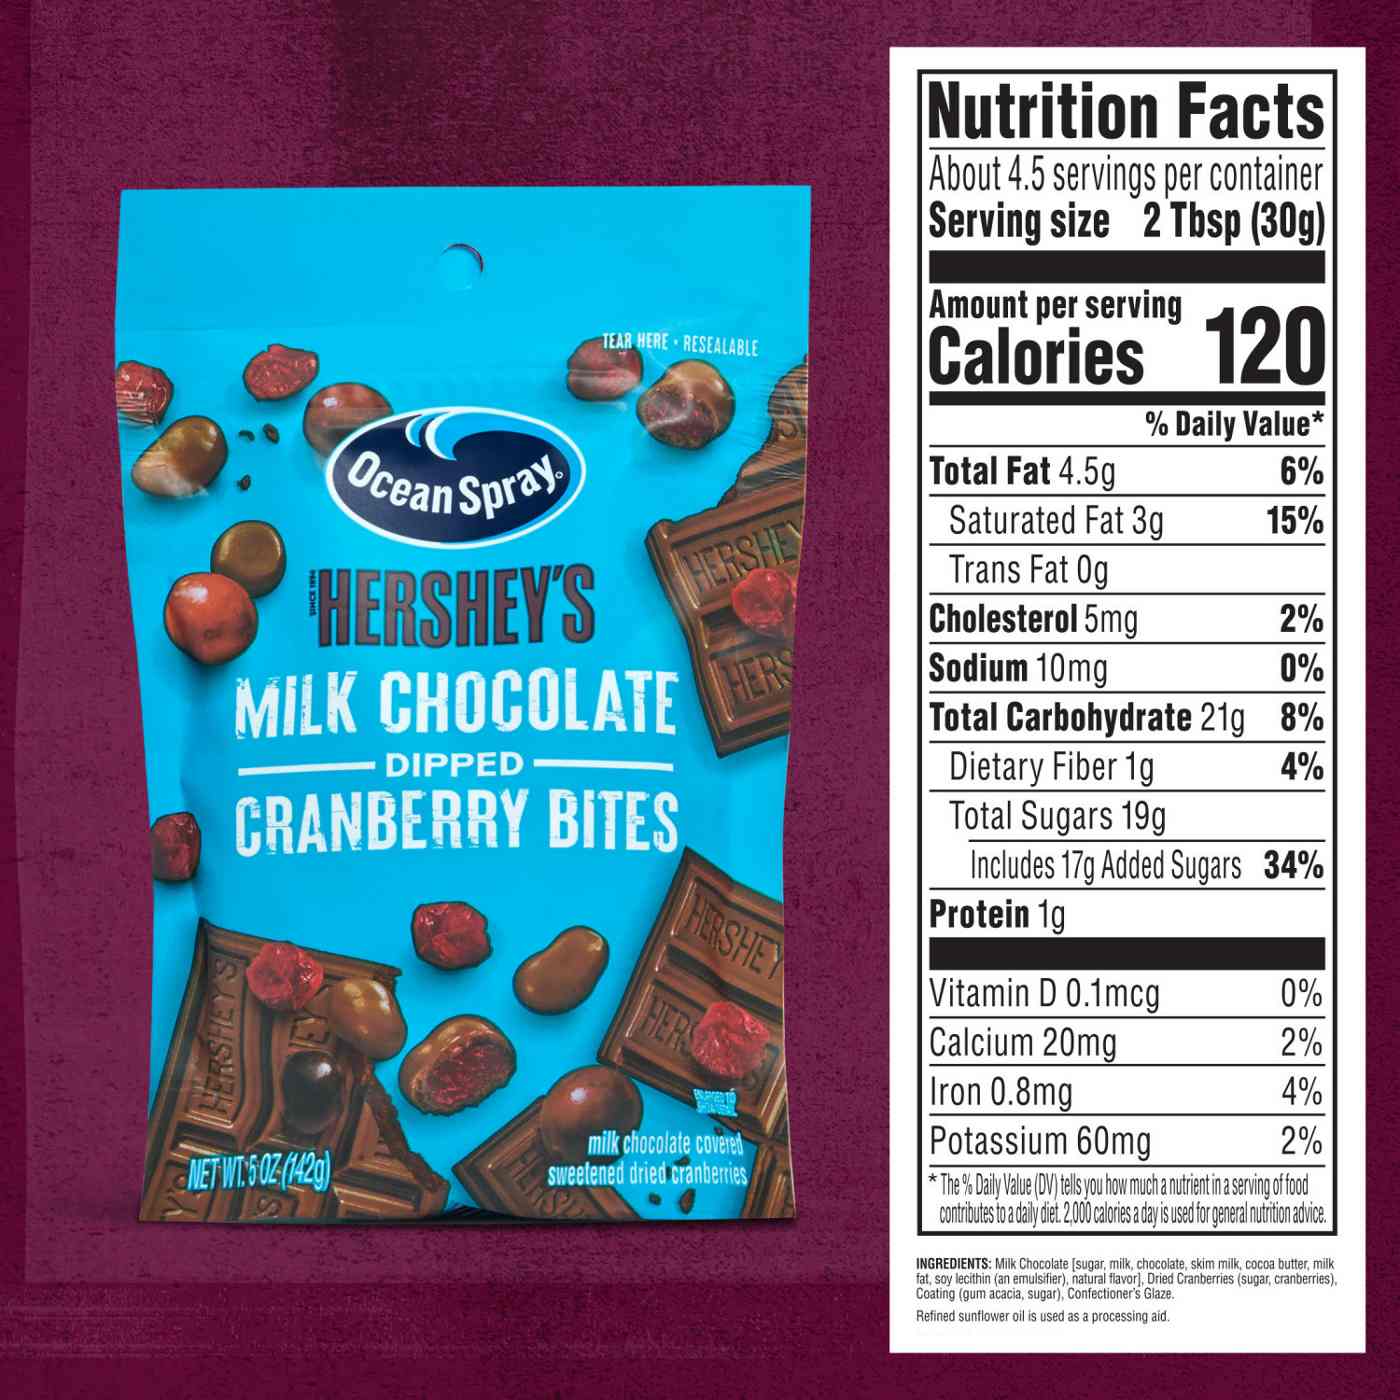 Ocean Spray Ocean Spray® HERSHEY’S® Milk Chocolate Dipped Cranberry Bites, Chocolate Covered Dried Cranberries, 5 Oz Pouch; image 3 of 7